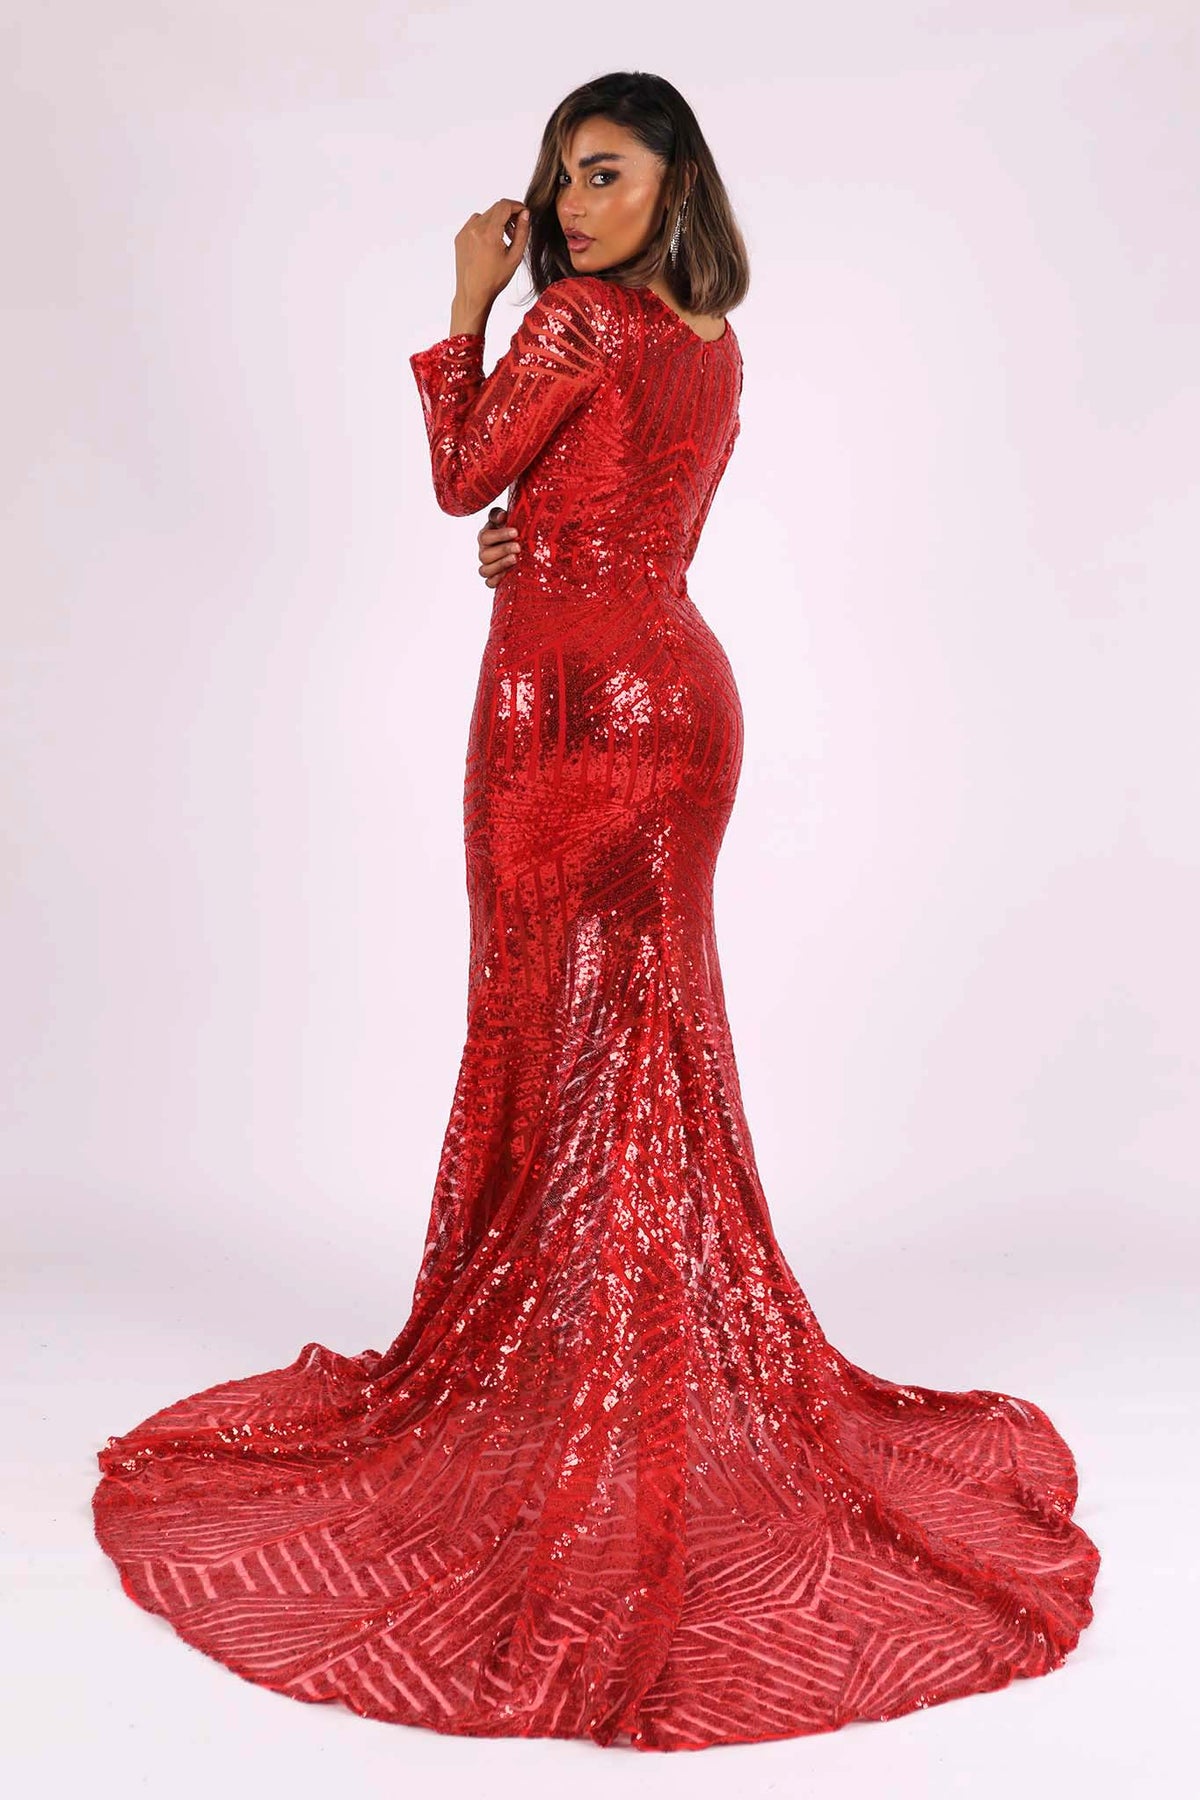 Closed back and long trail design of red long sleeve geometric pattern sequin full length evening gown with V plunge neckline, center front slit and floor sweeping train